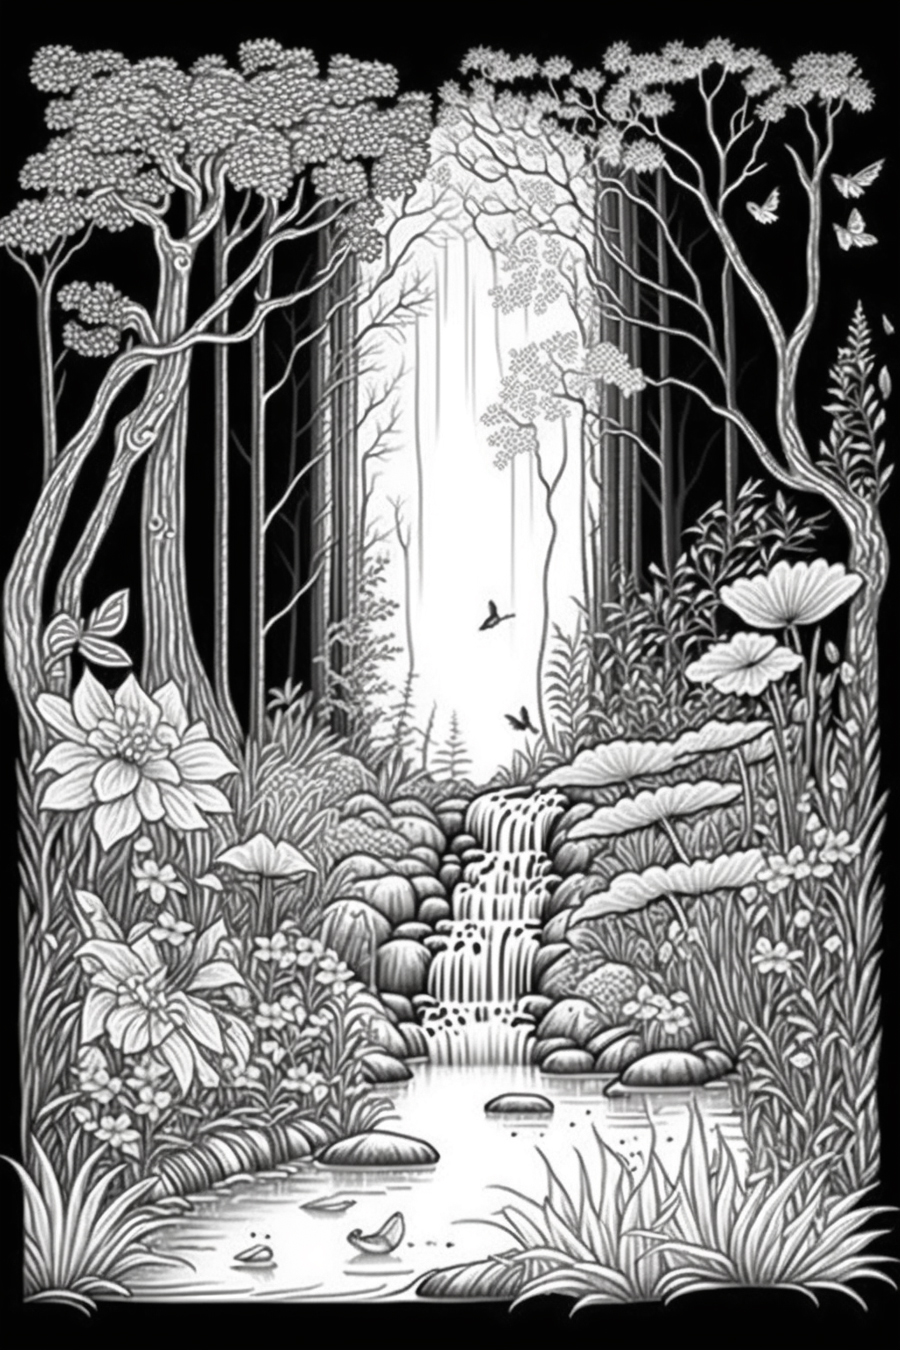 A black and white drawing of a waterfall in the forest.